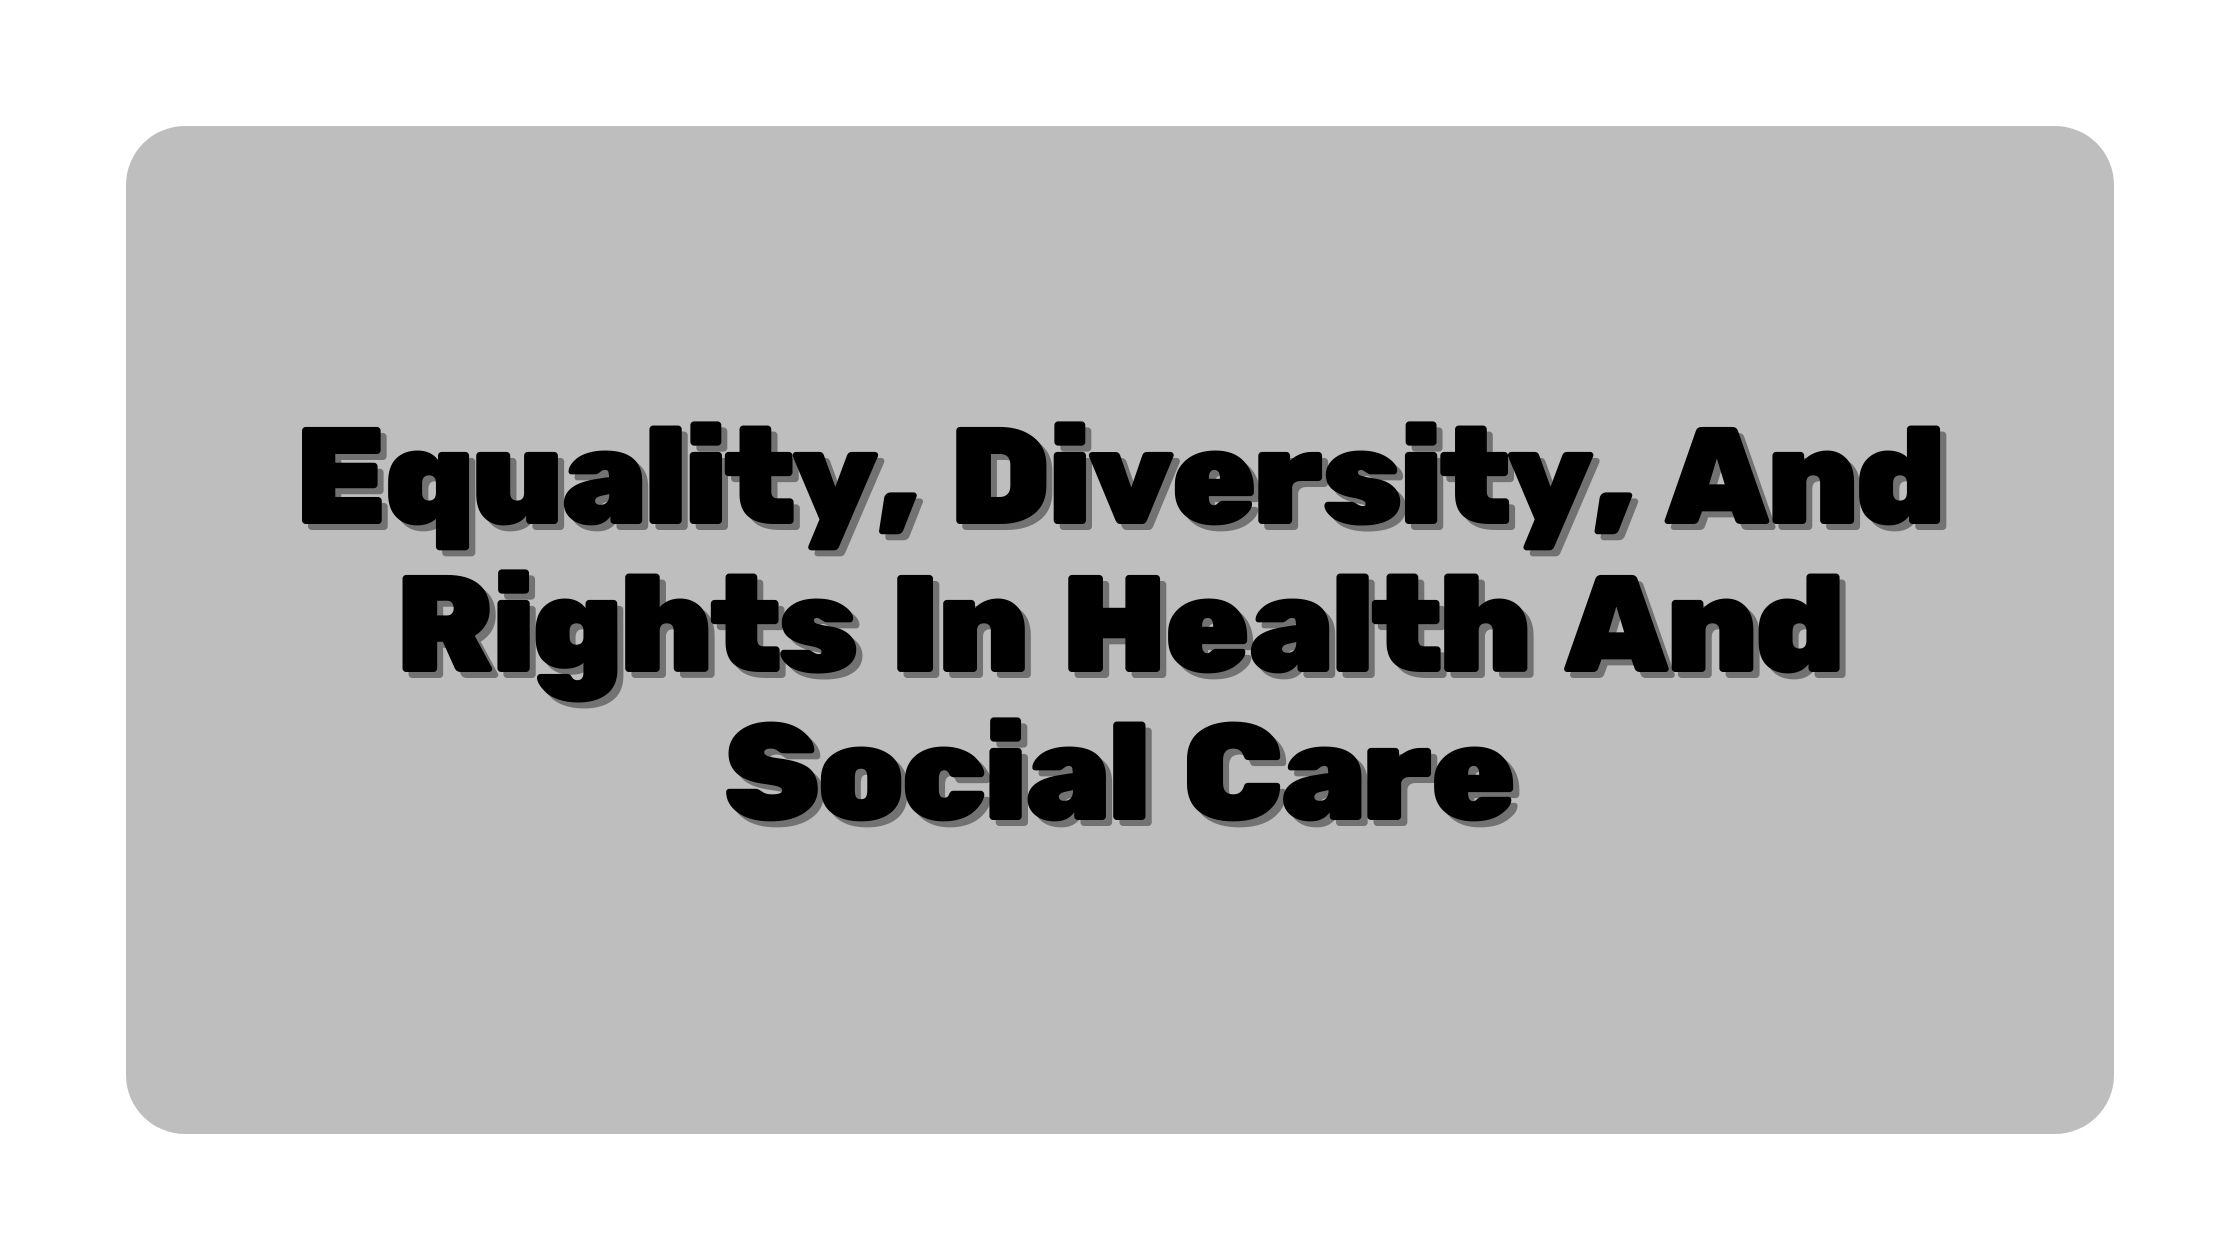 Equality, diversity, and rights in health and social care